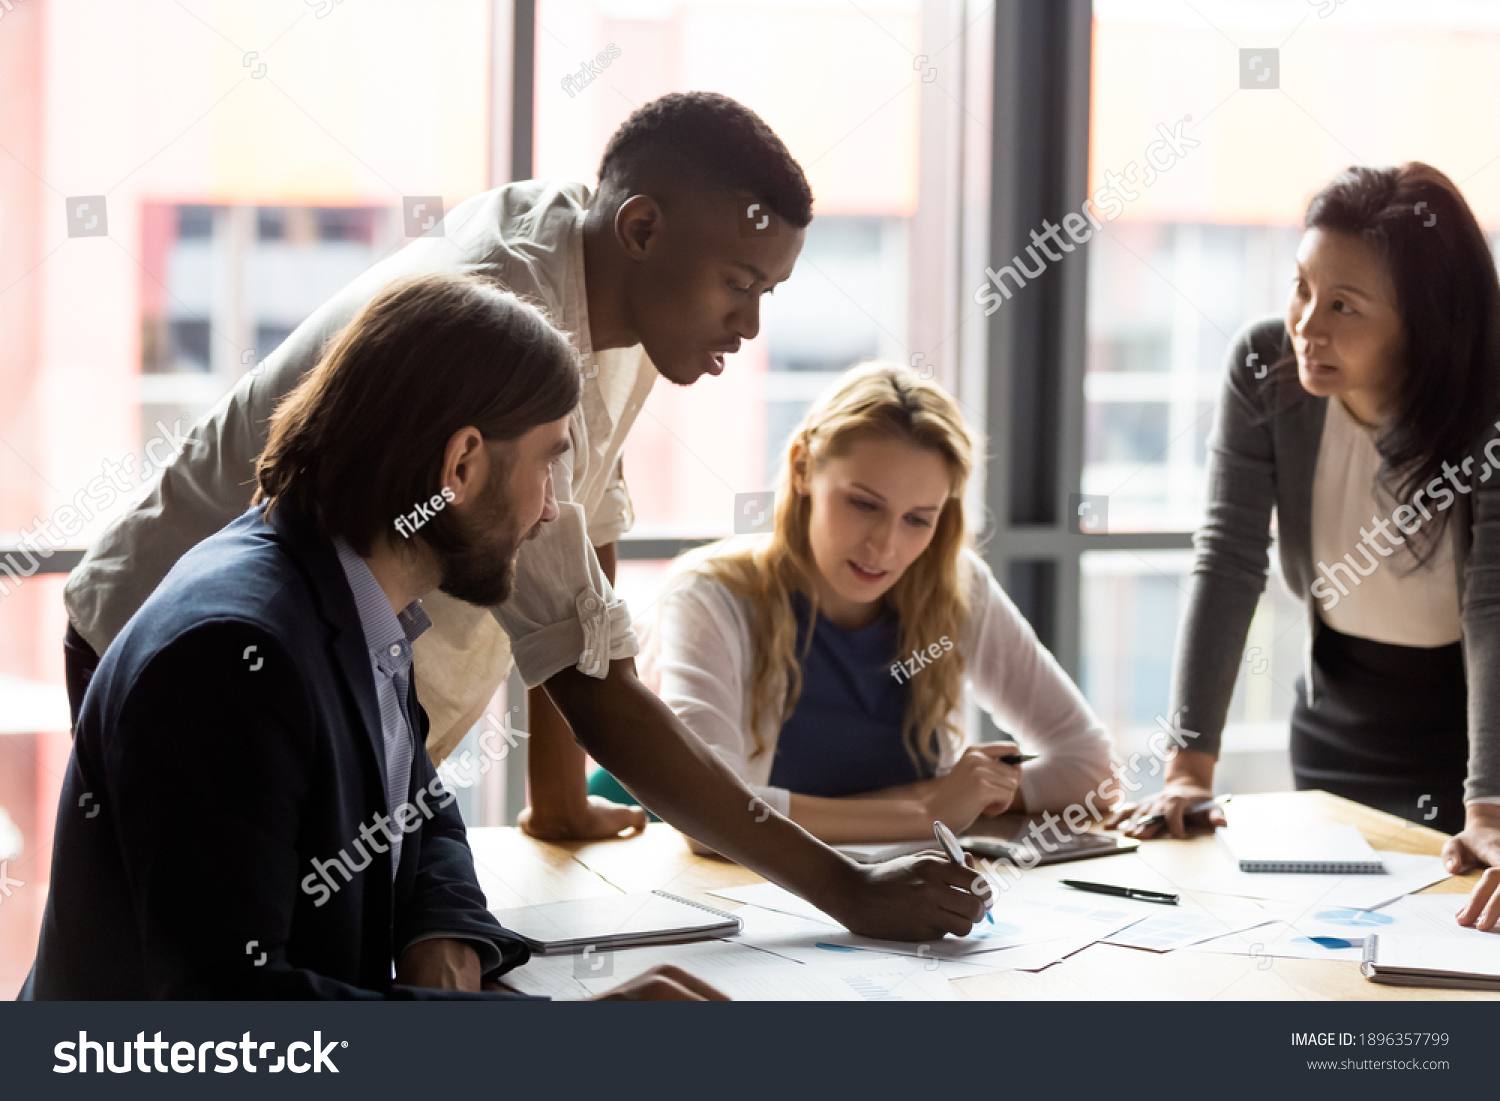 Concentrated young african american employee analyzing marketing research results or sales statistics data at briefing meeting with motivated older korean and young caucasian colleagues in office. #1896357799